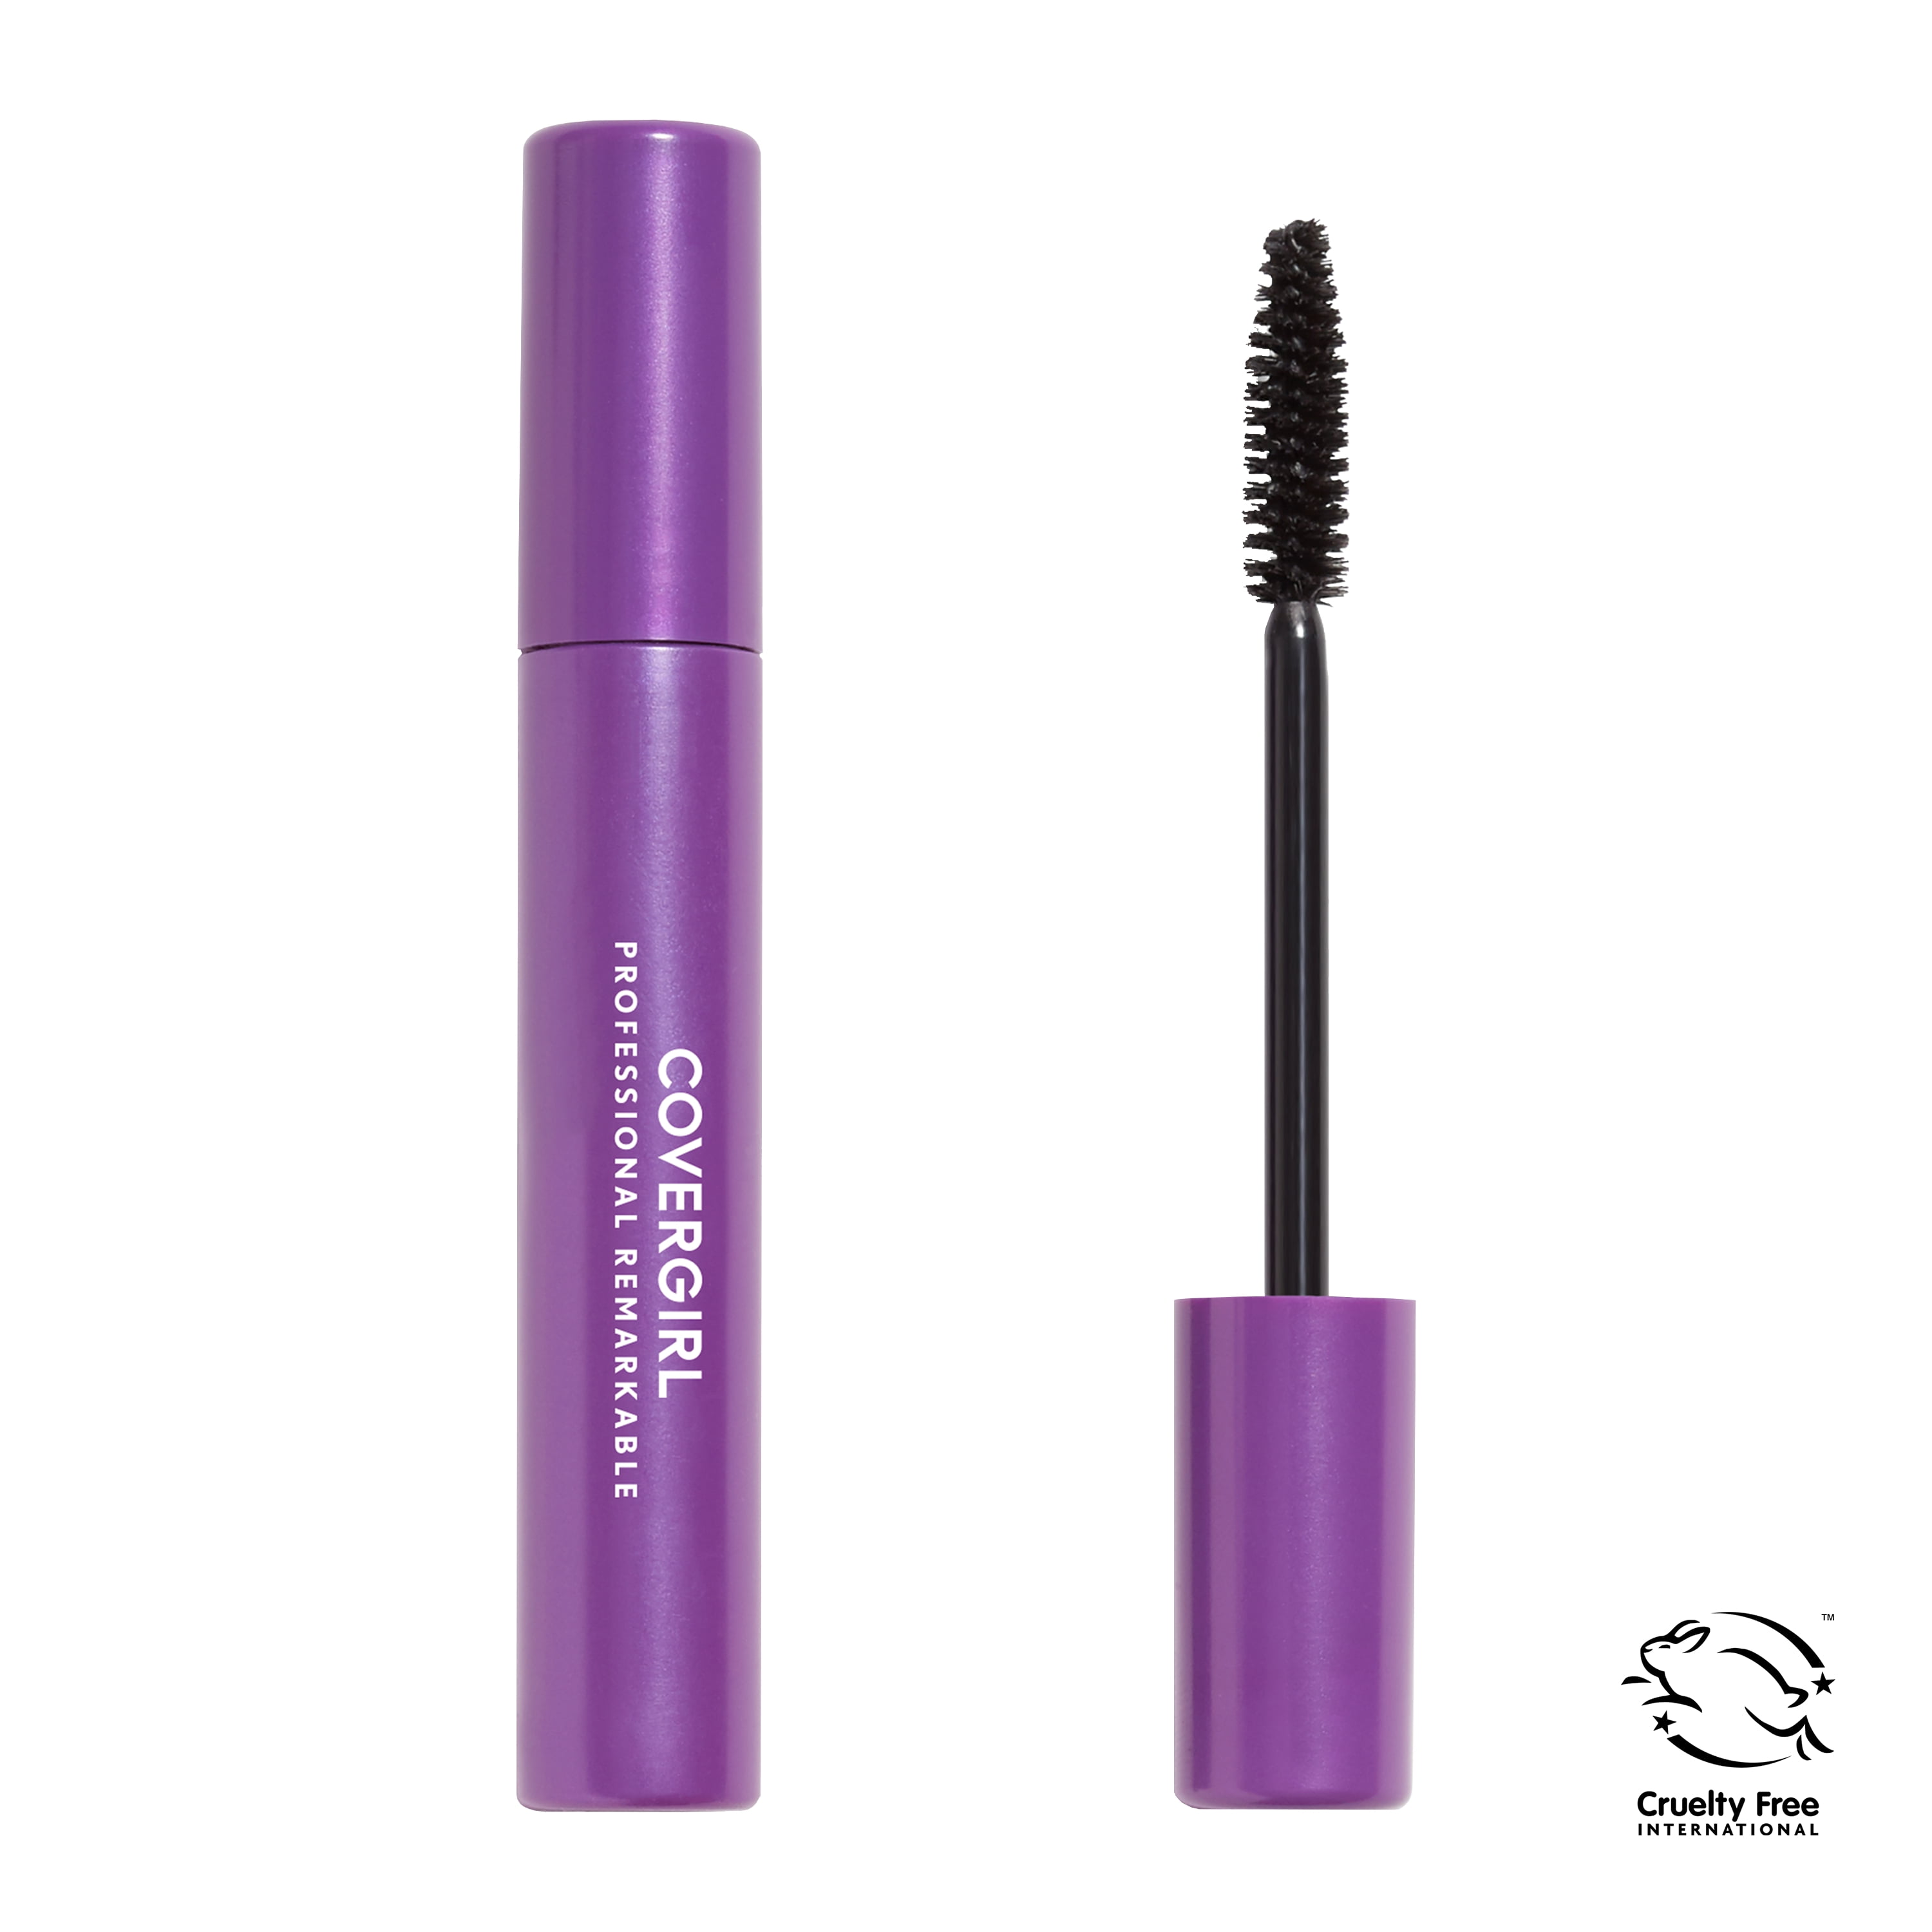 COVERGIRL Professional Remarkable Mascara, 200 Very Black, 0.3 oz, Smudge-Proof Mascara, Voluminous Mascara, Lengthening Mascara, Resists Swipes and Smears, Darkens and Defines All Day